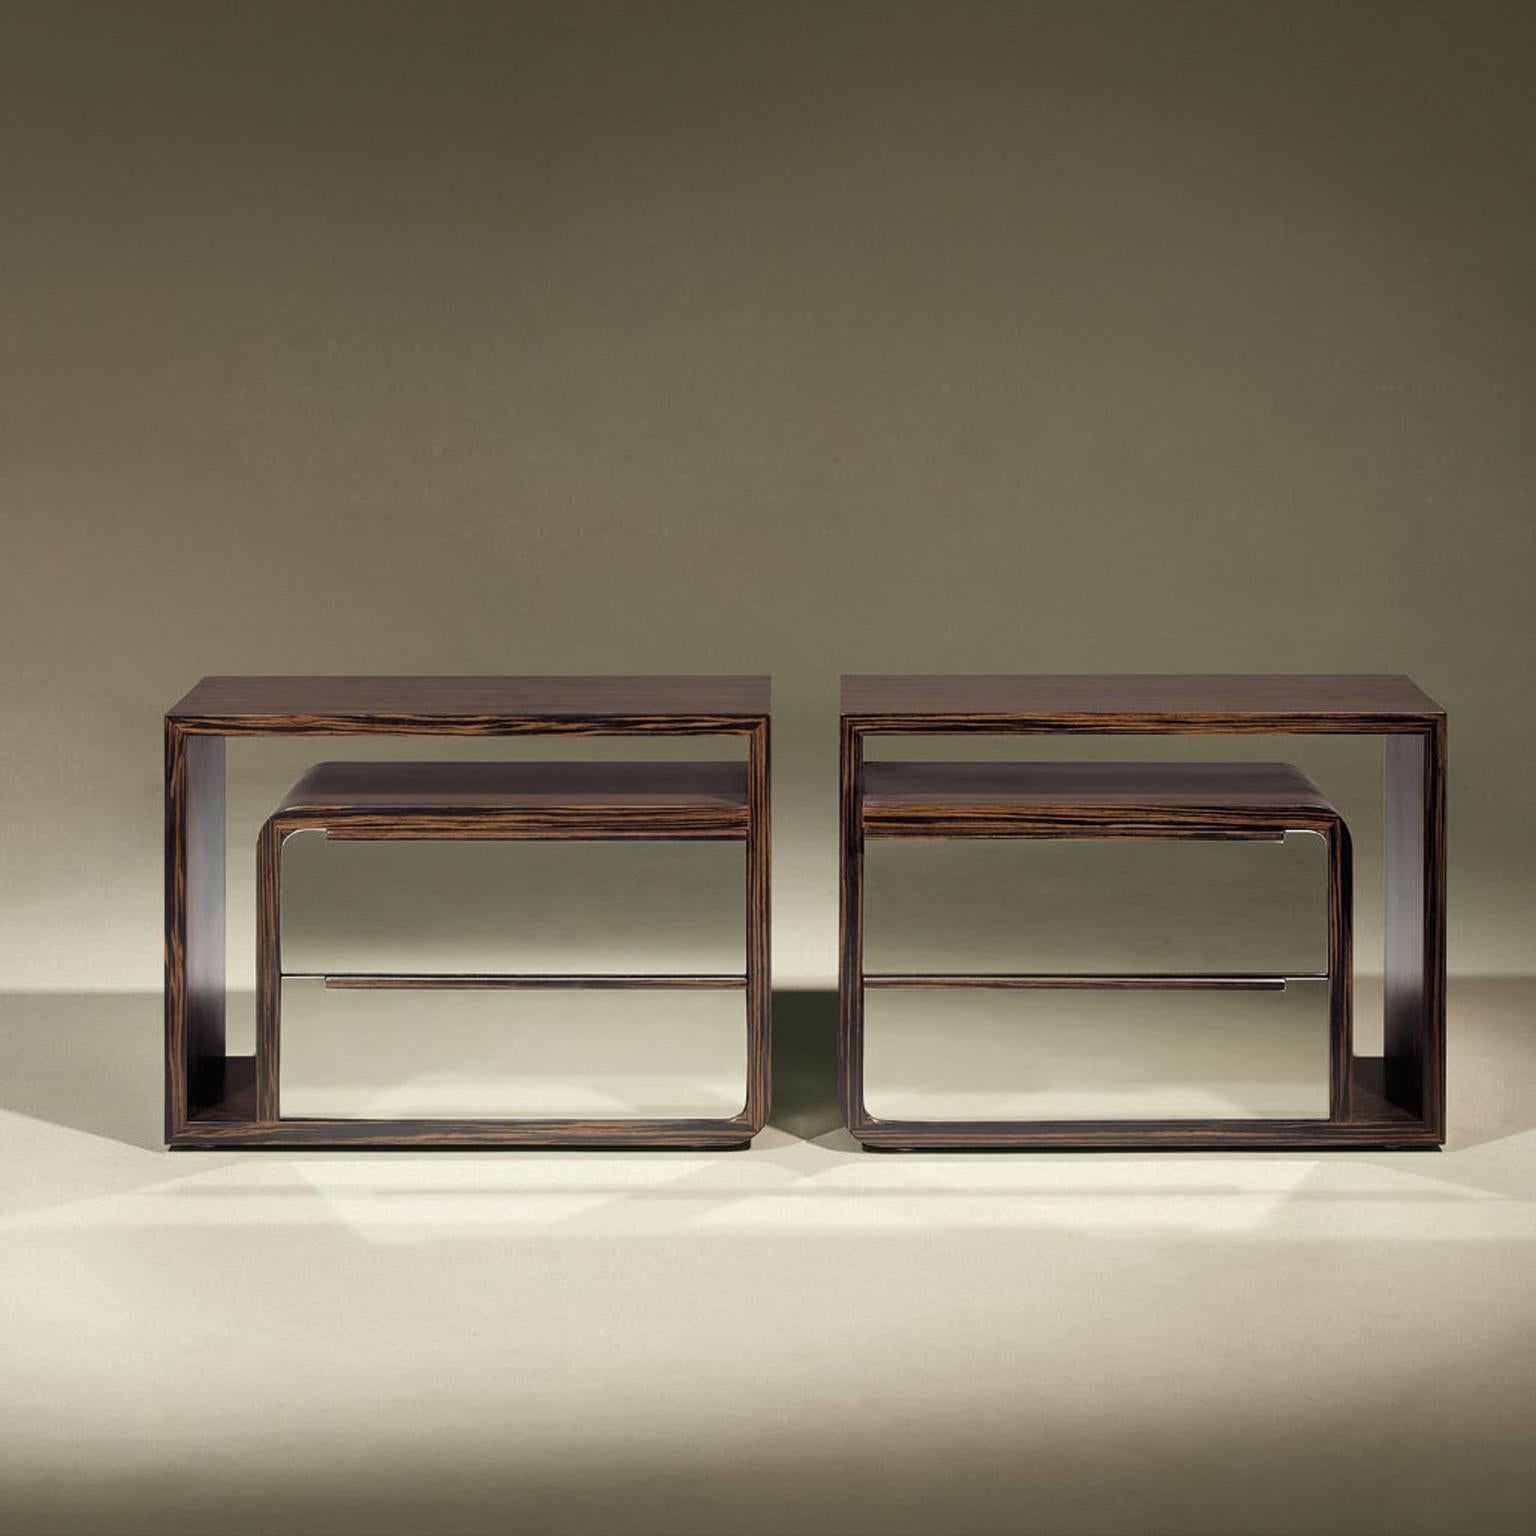 Rose Contemporary Bedside Table with Two Mirrored Drawers by Luísa Peixoto For Sale 5